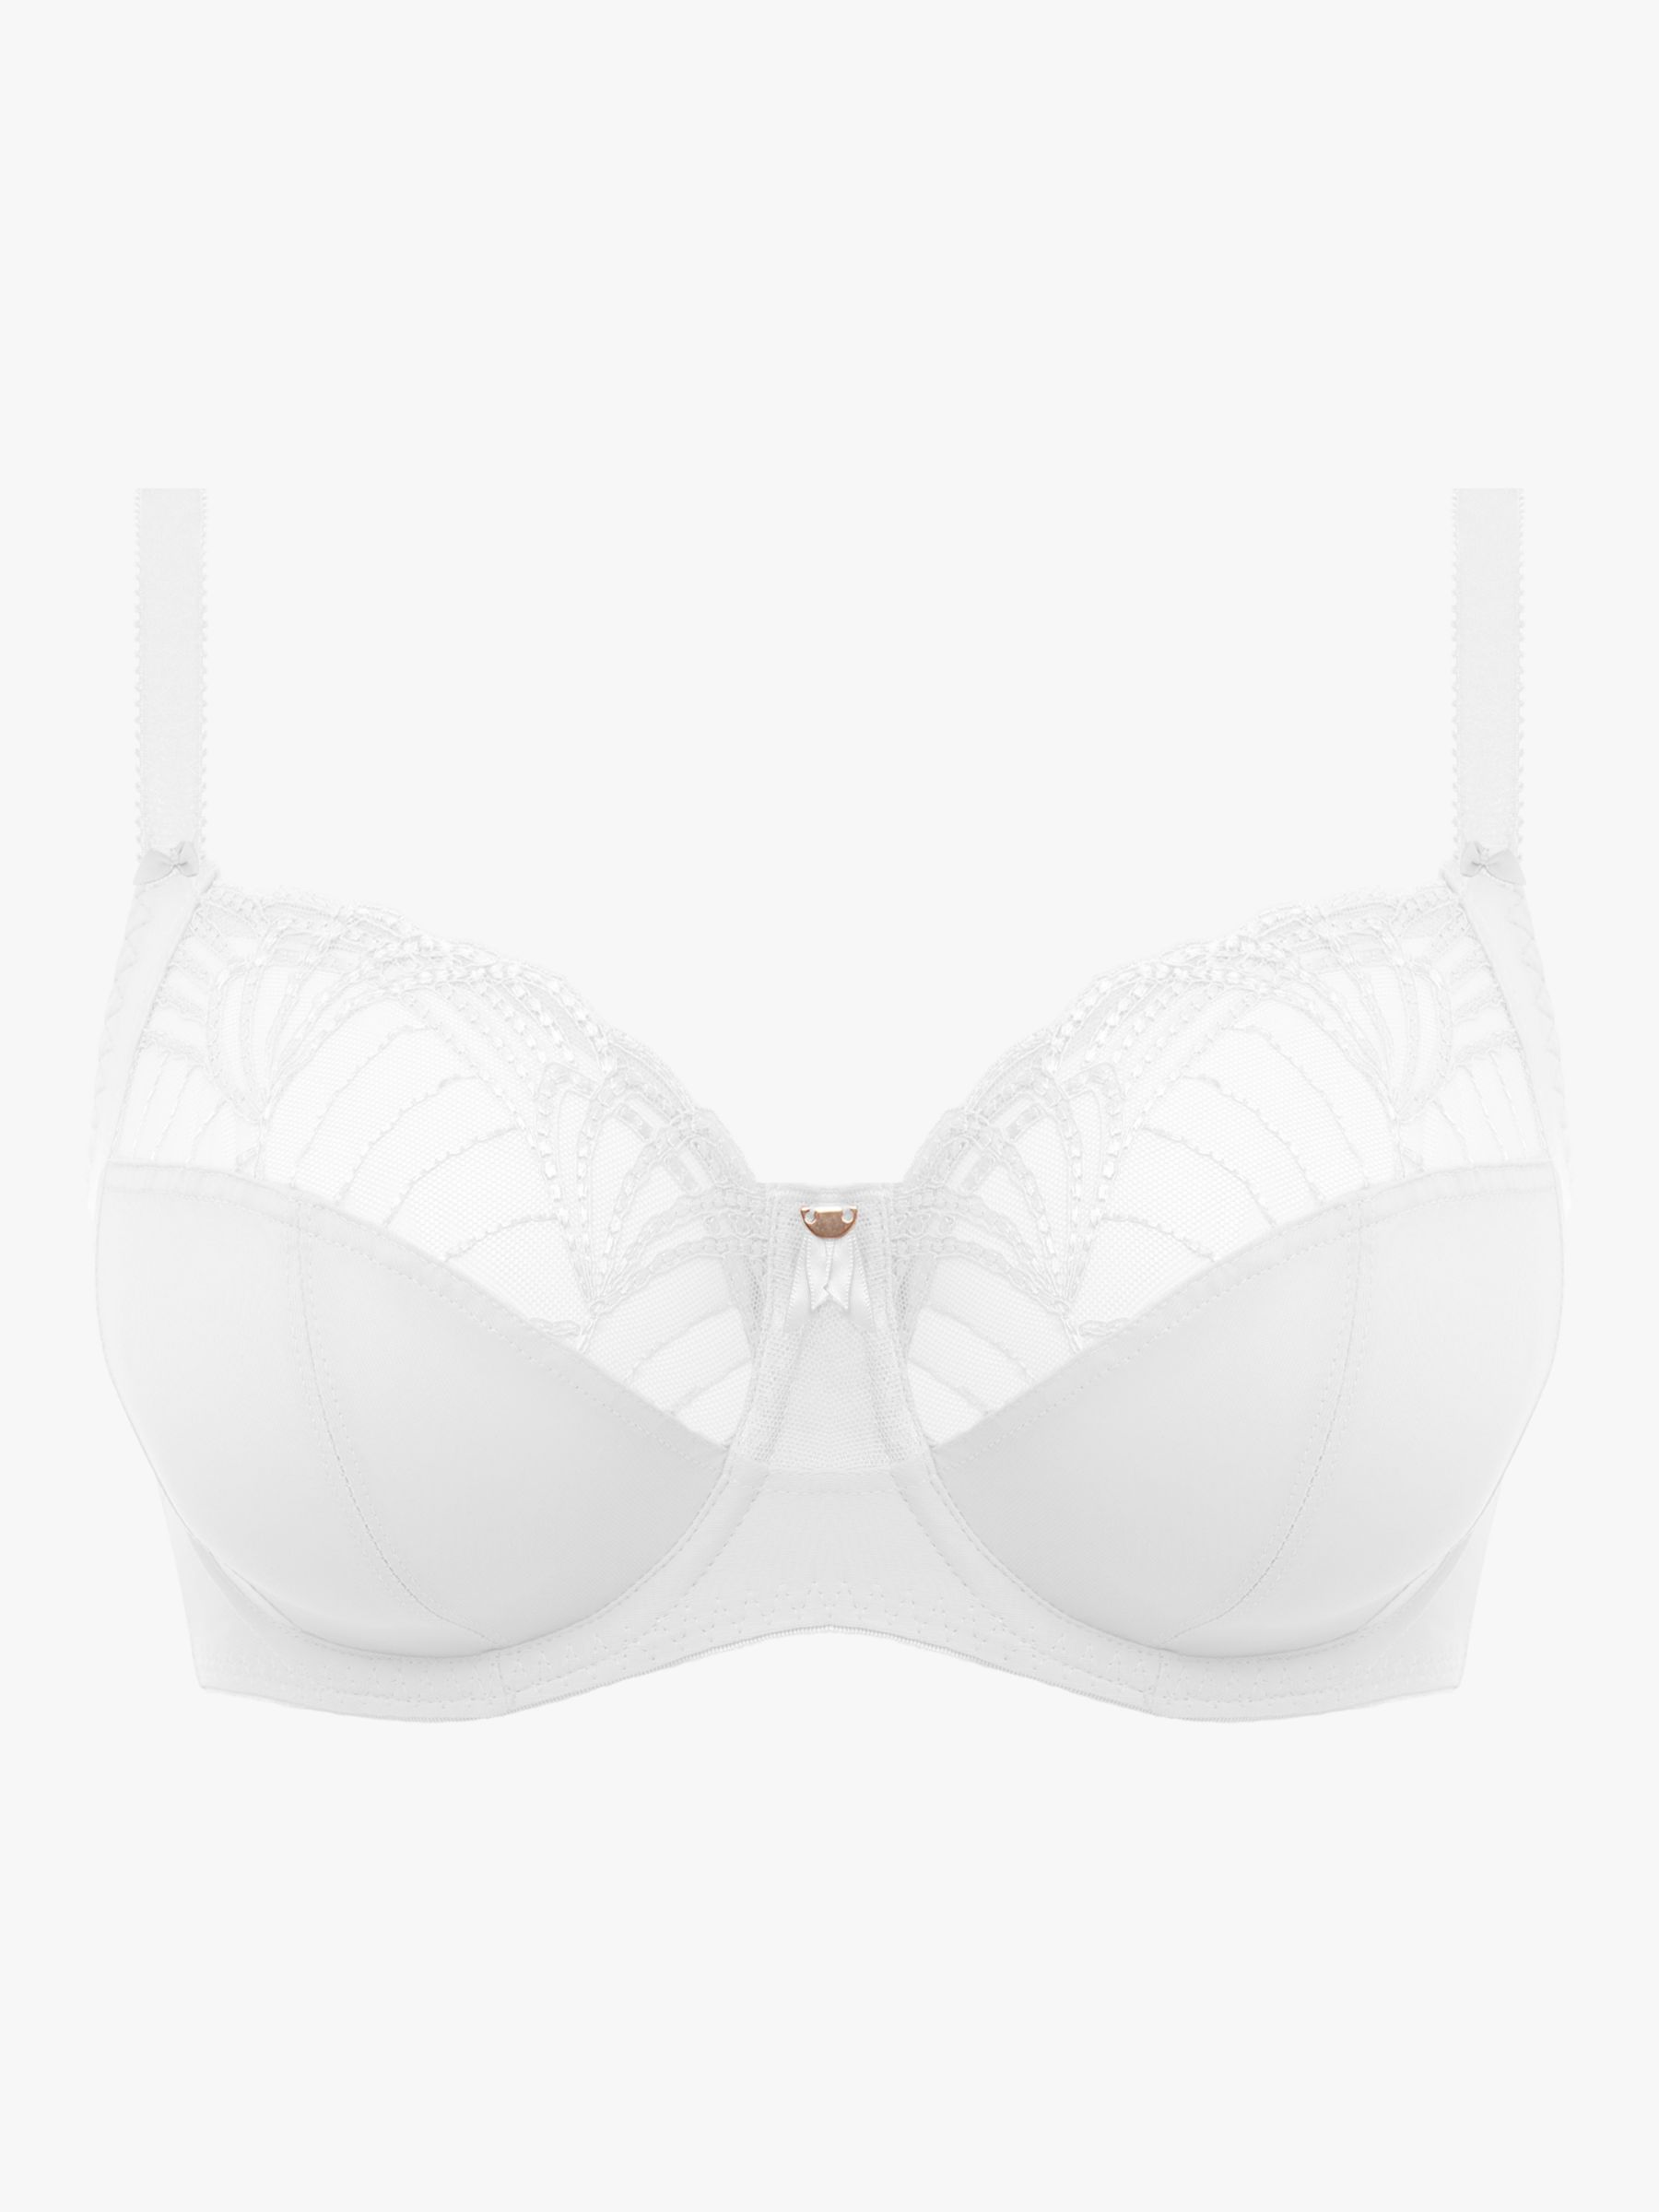 Fantasie Adelle Underwired Side Support Full Cup Bra, White at